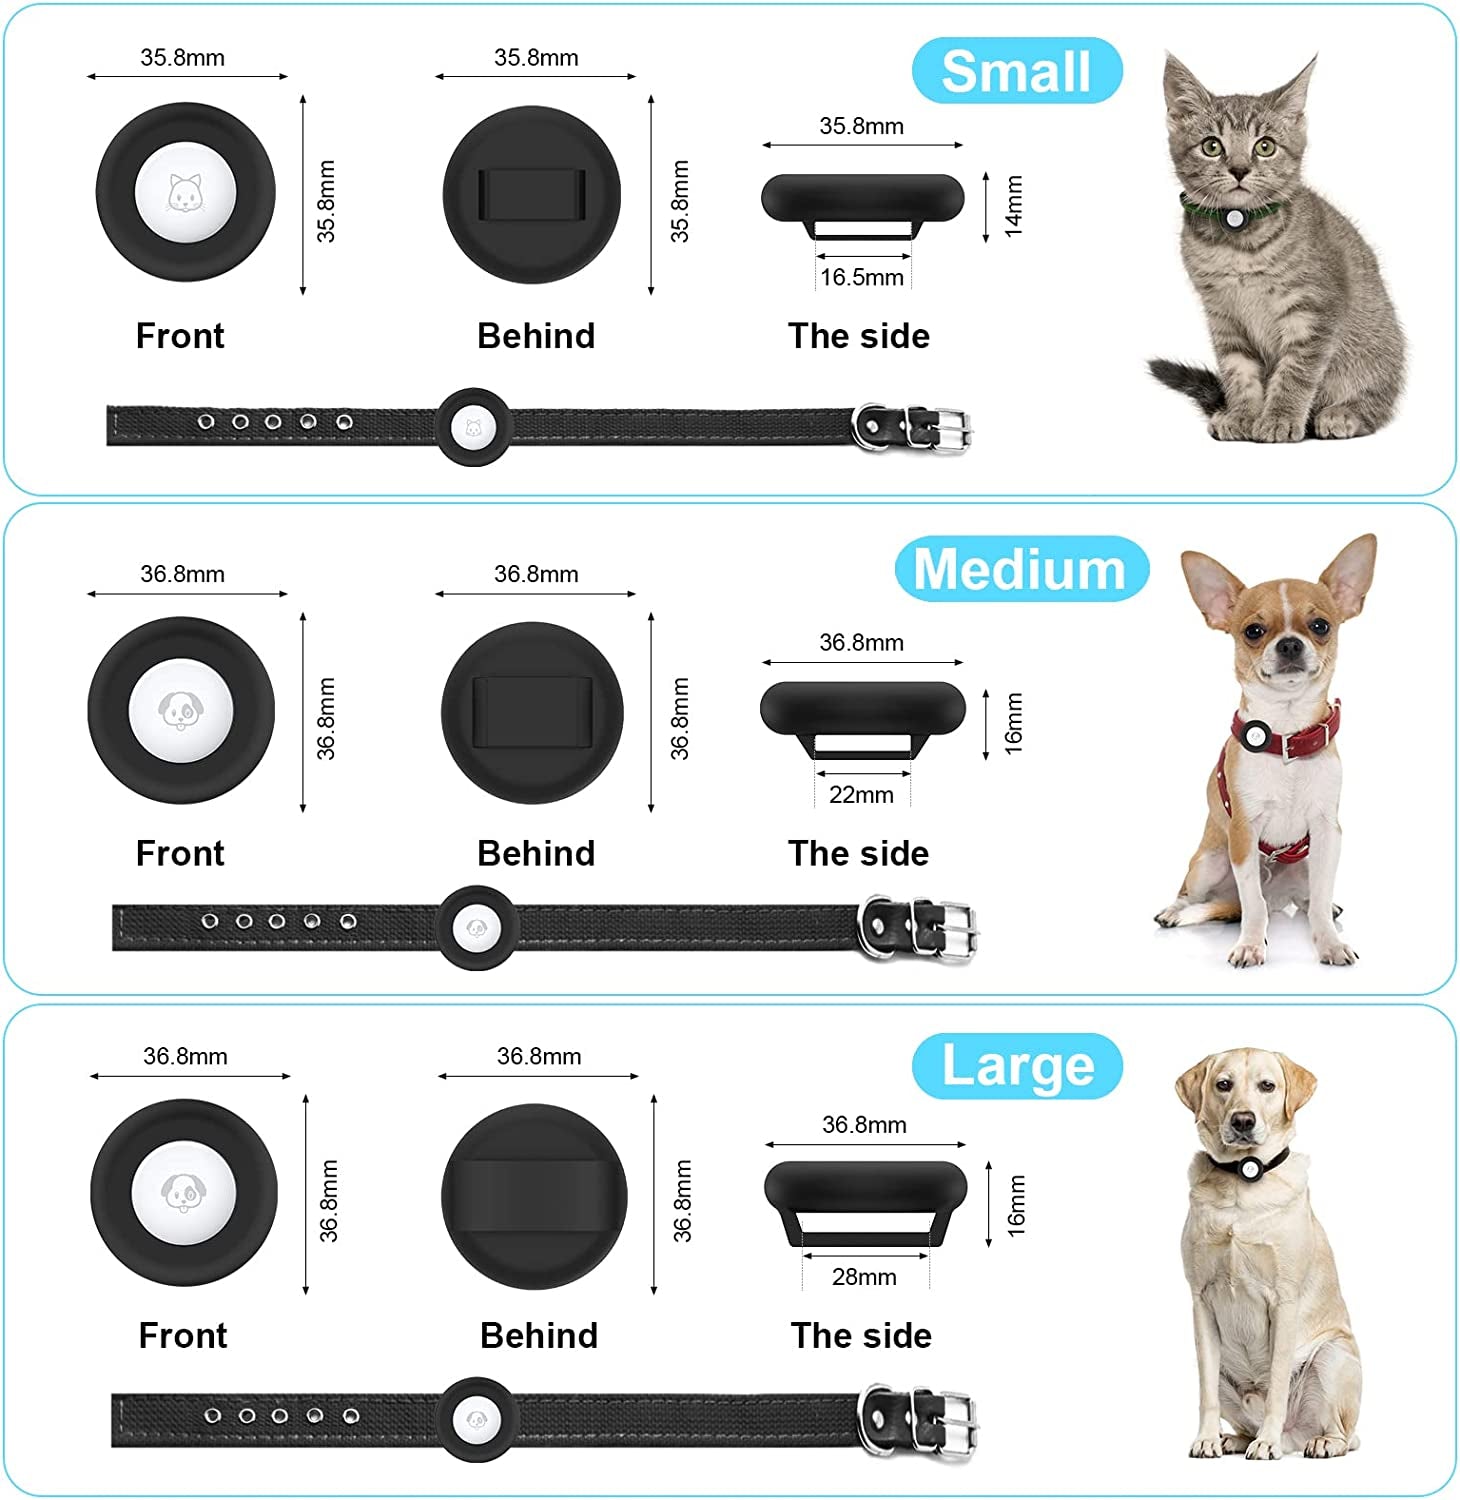 Airtag Dog Collar Holder Silicone Pet Collar Case for Apple Airtags, Anti-Lost Air Tag Holder Compatible with Small Wide Cat Dog Collars (Large:For Dog Collar 0.8-1.1 Inch, Black)